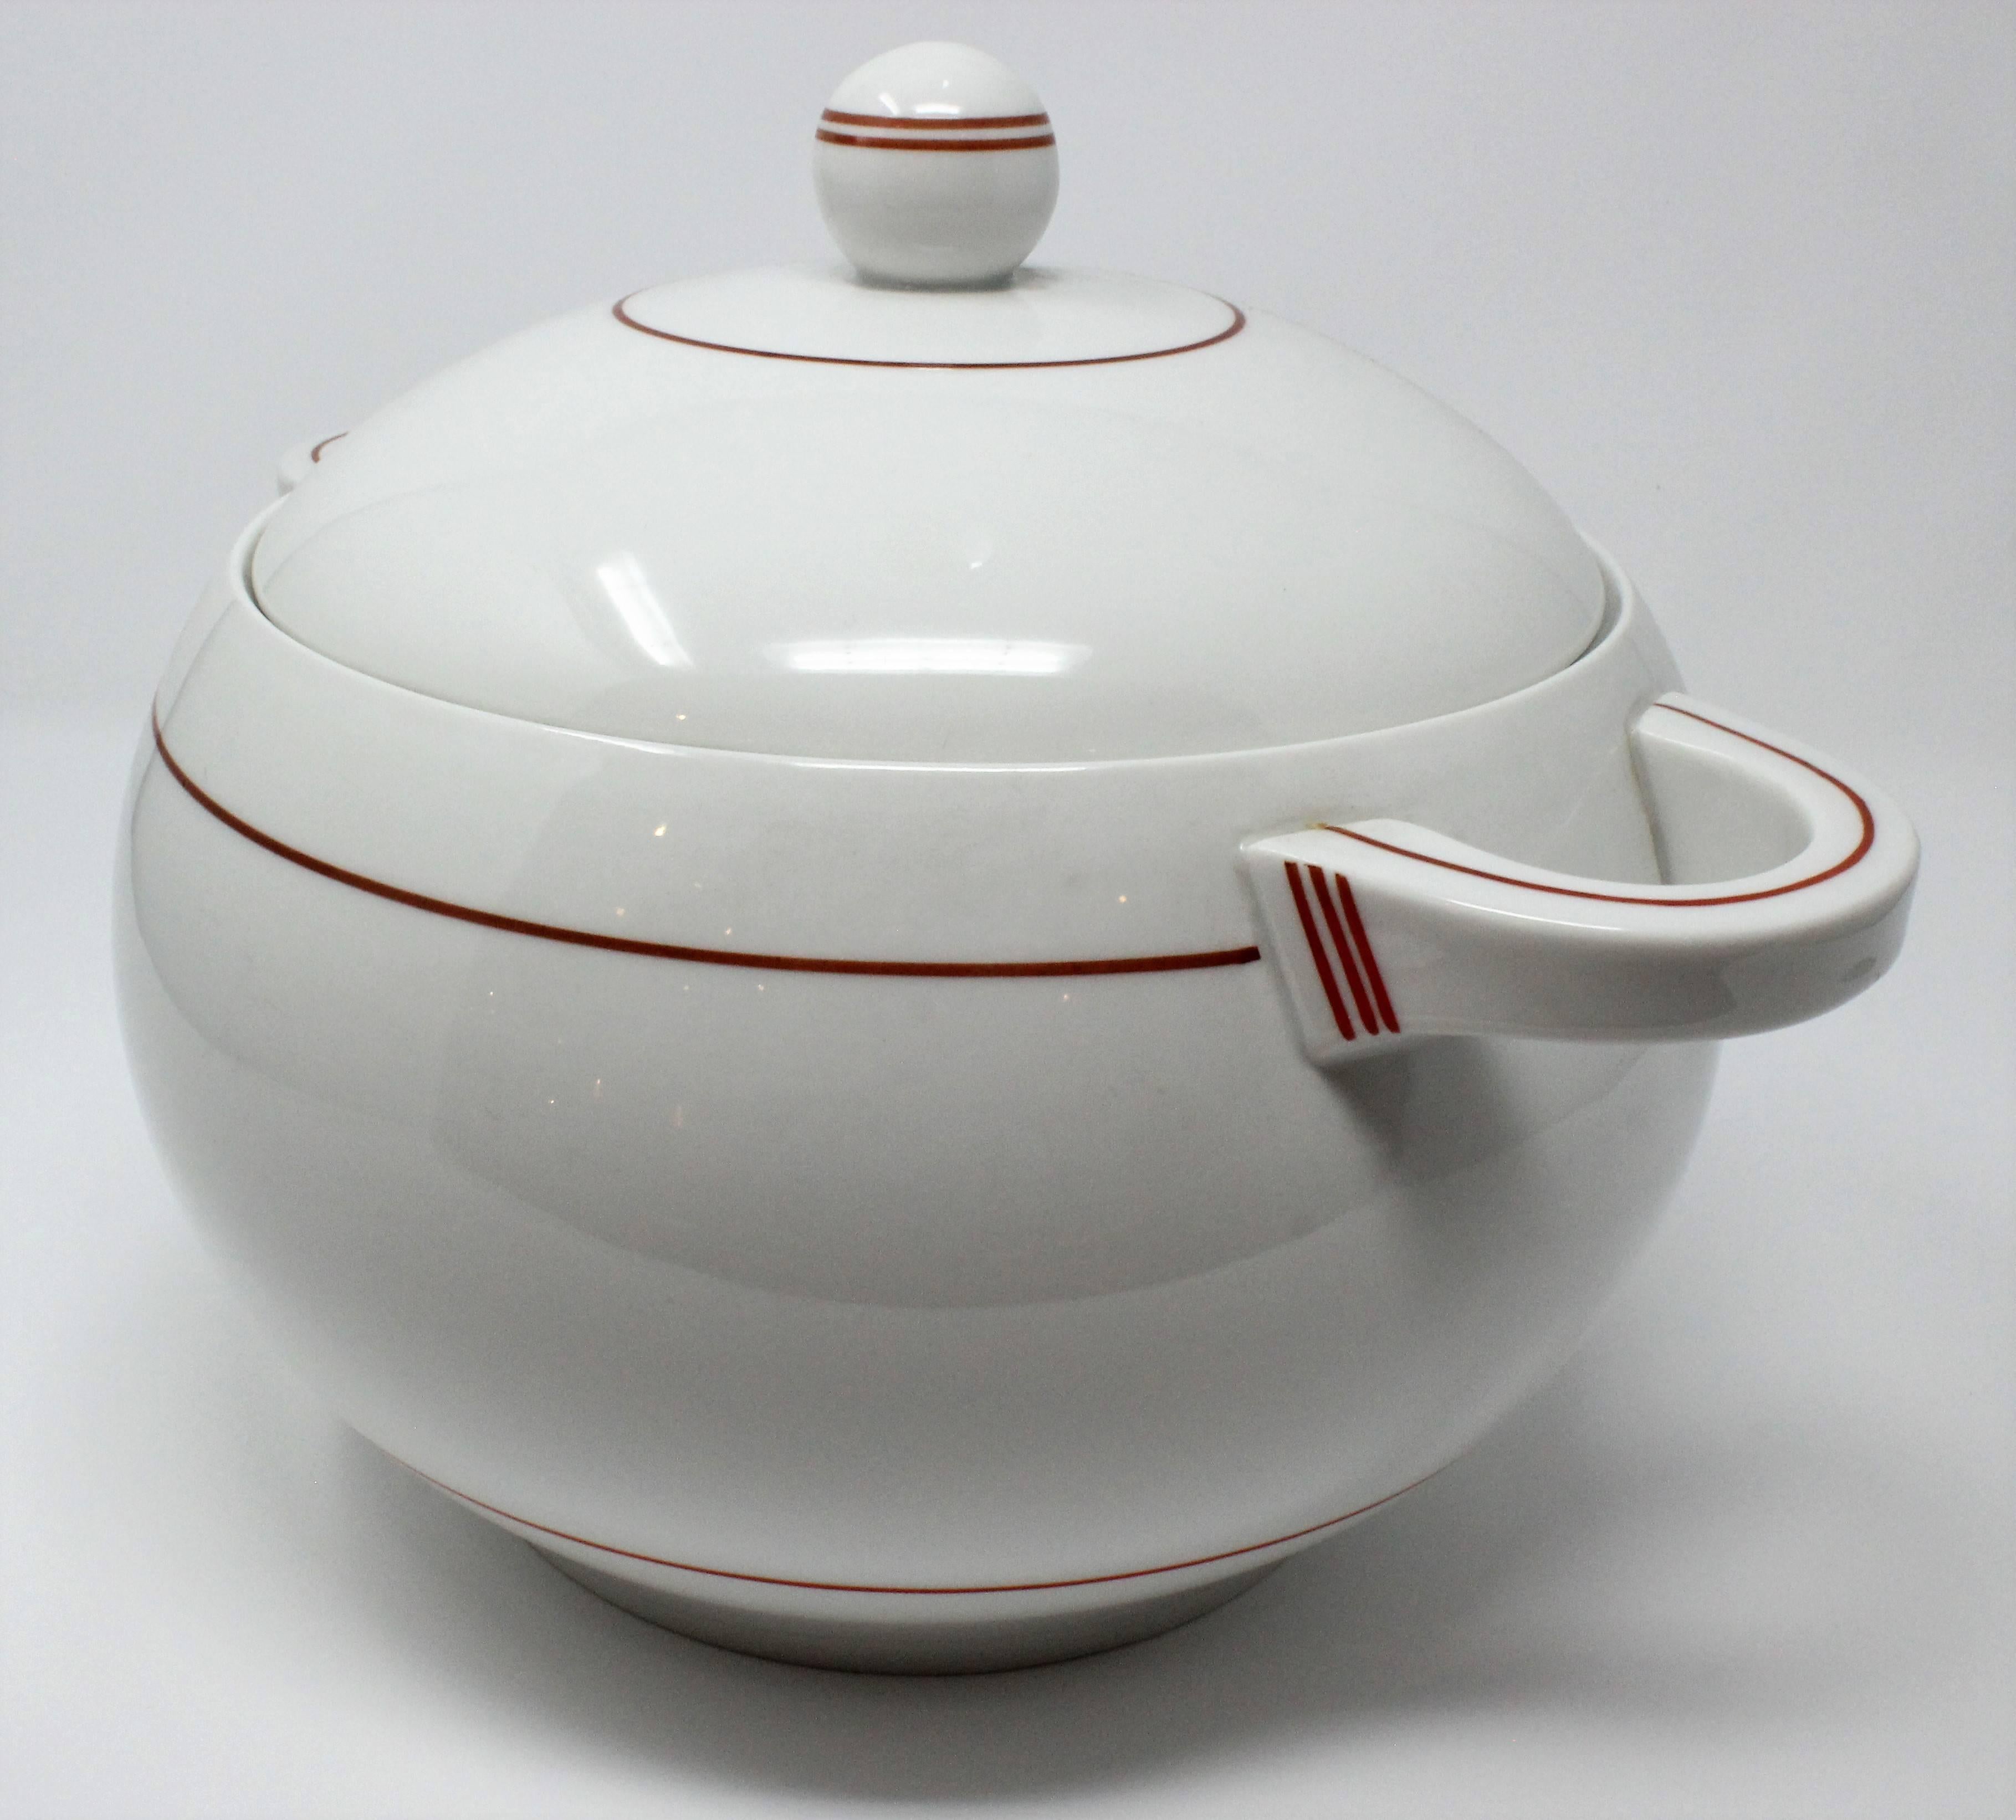 1930s Czechoslovakian Art Deco covered soup tureen by Haas & Czjzek. The tureen features a red stripe detail and is in near-perfect condition.